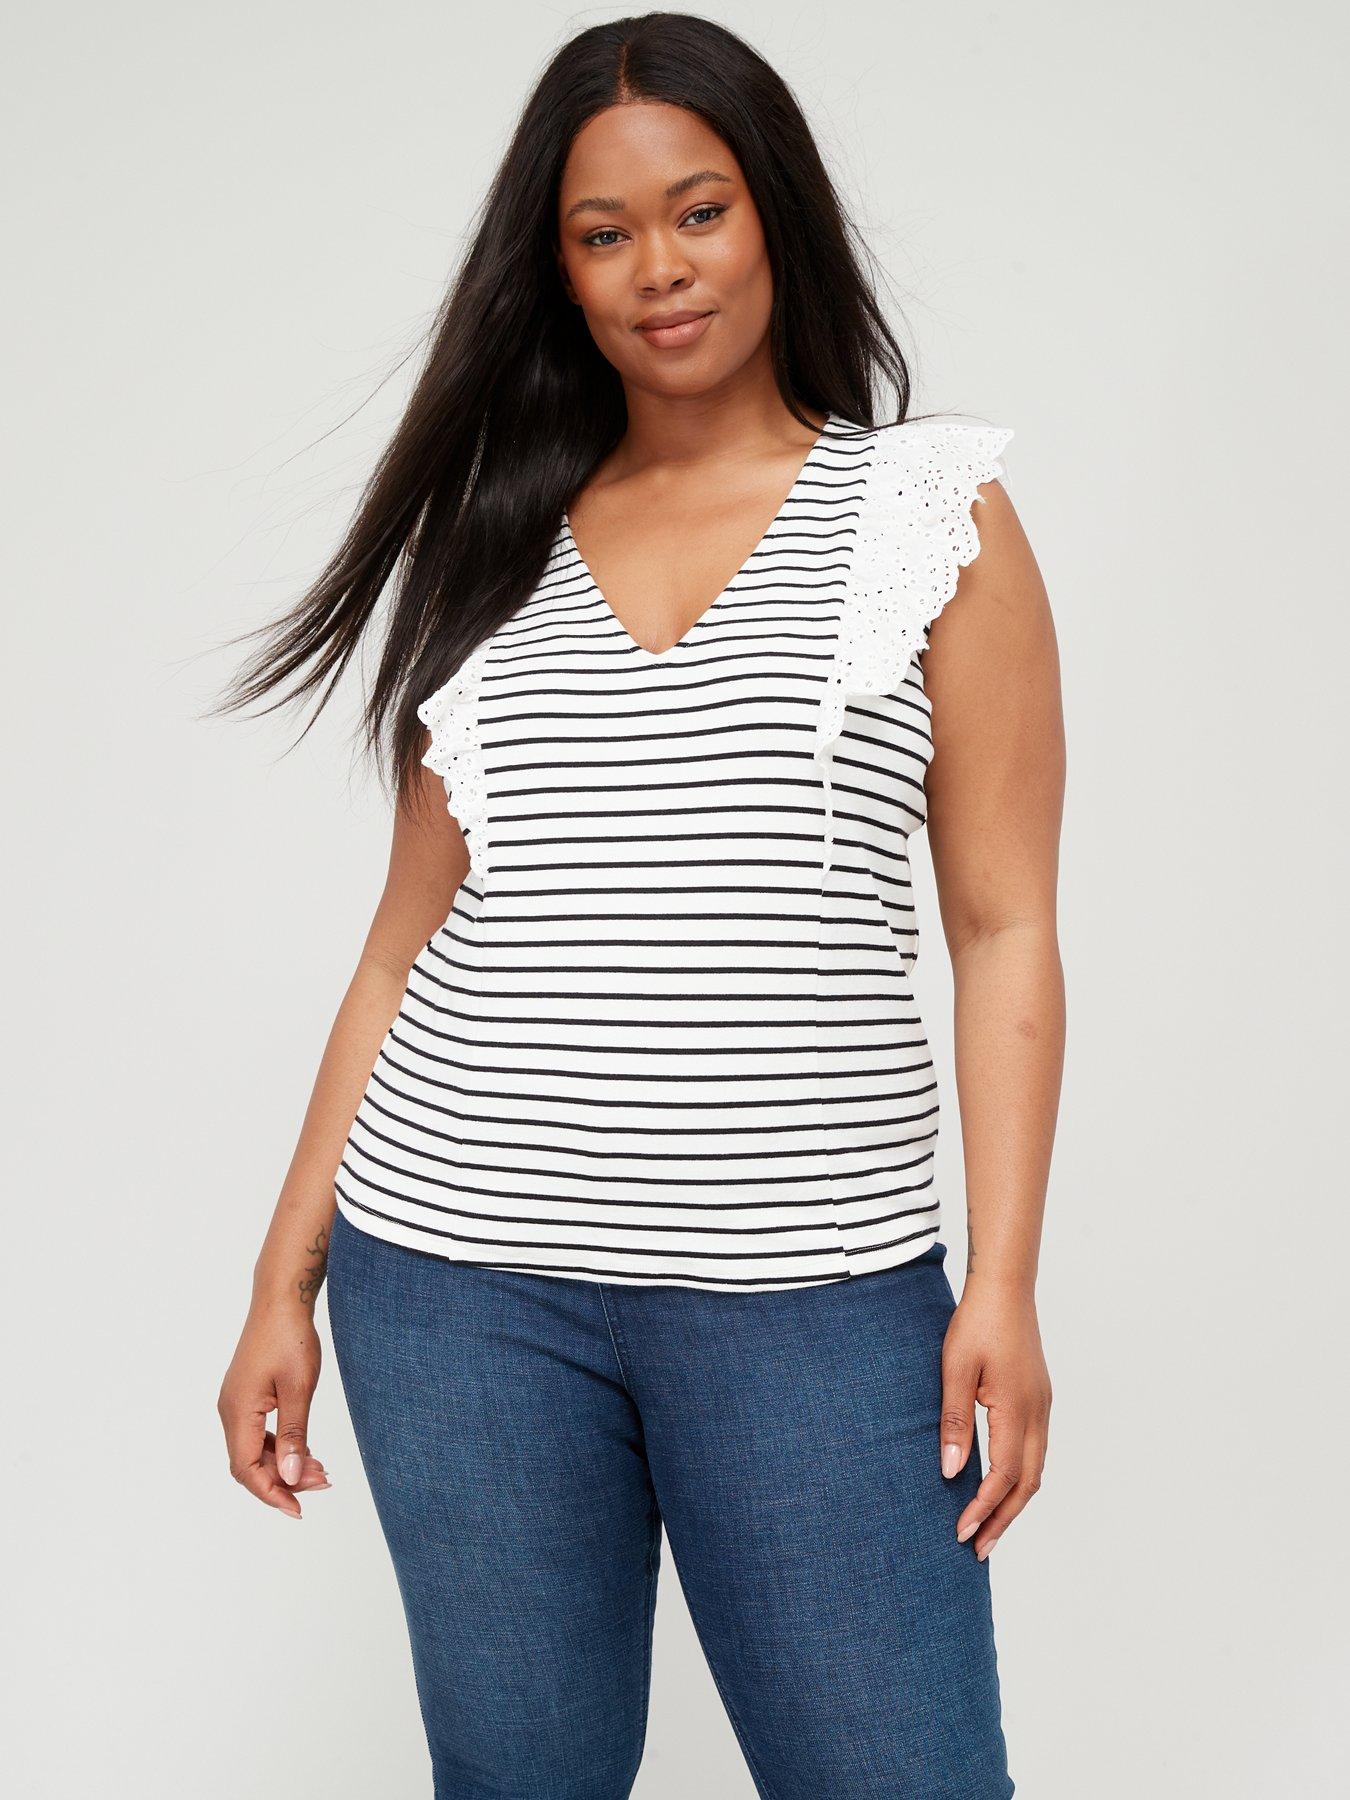 Clearance, Plus Size, Tops & t-shirts, Women